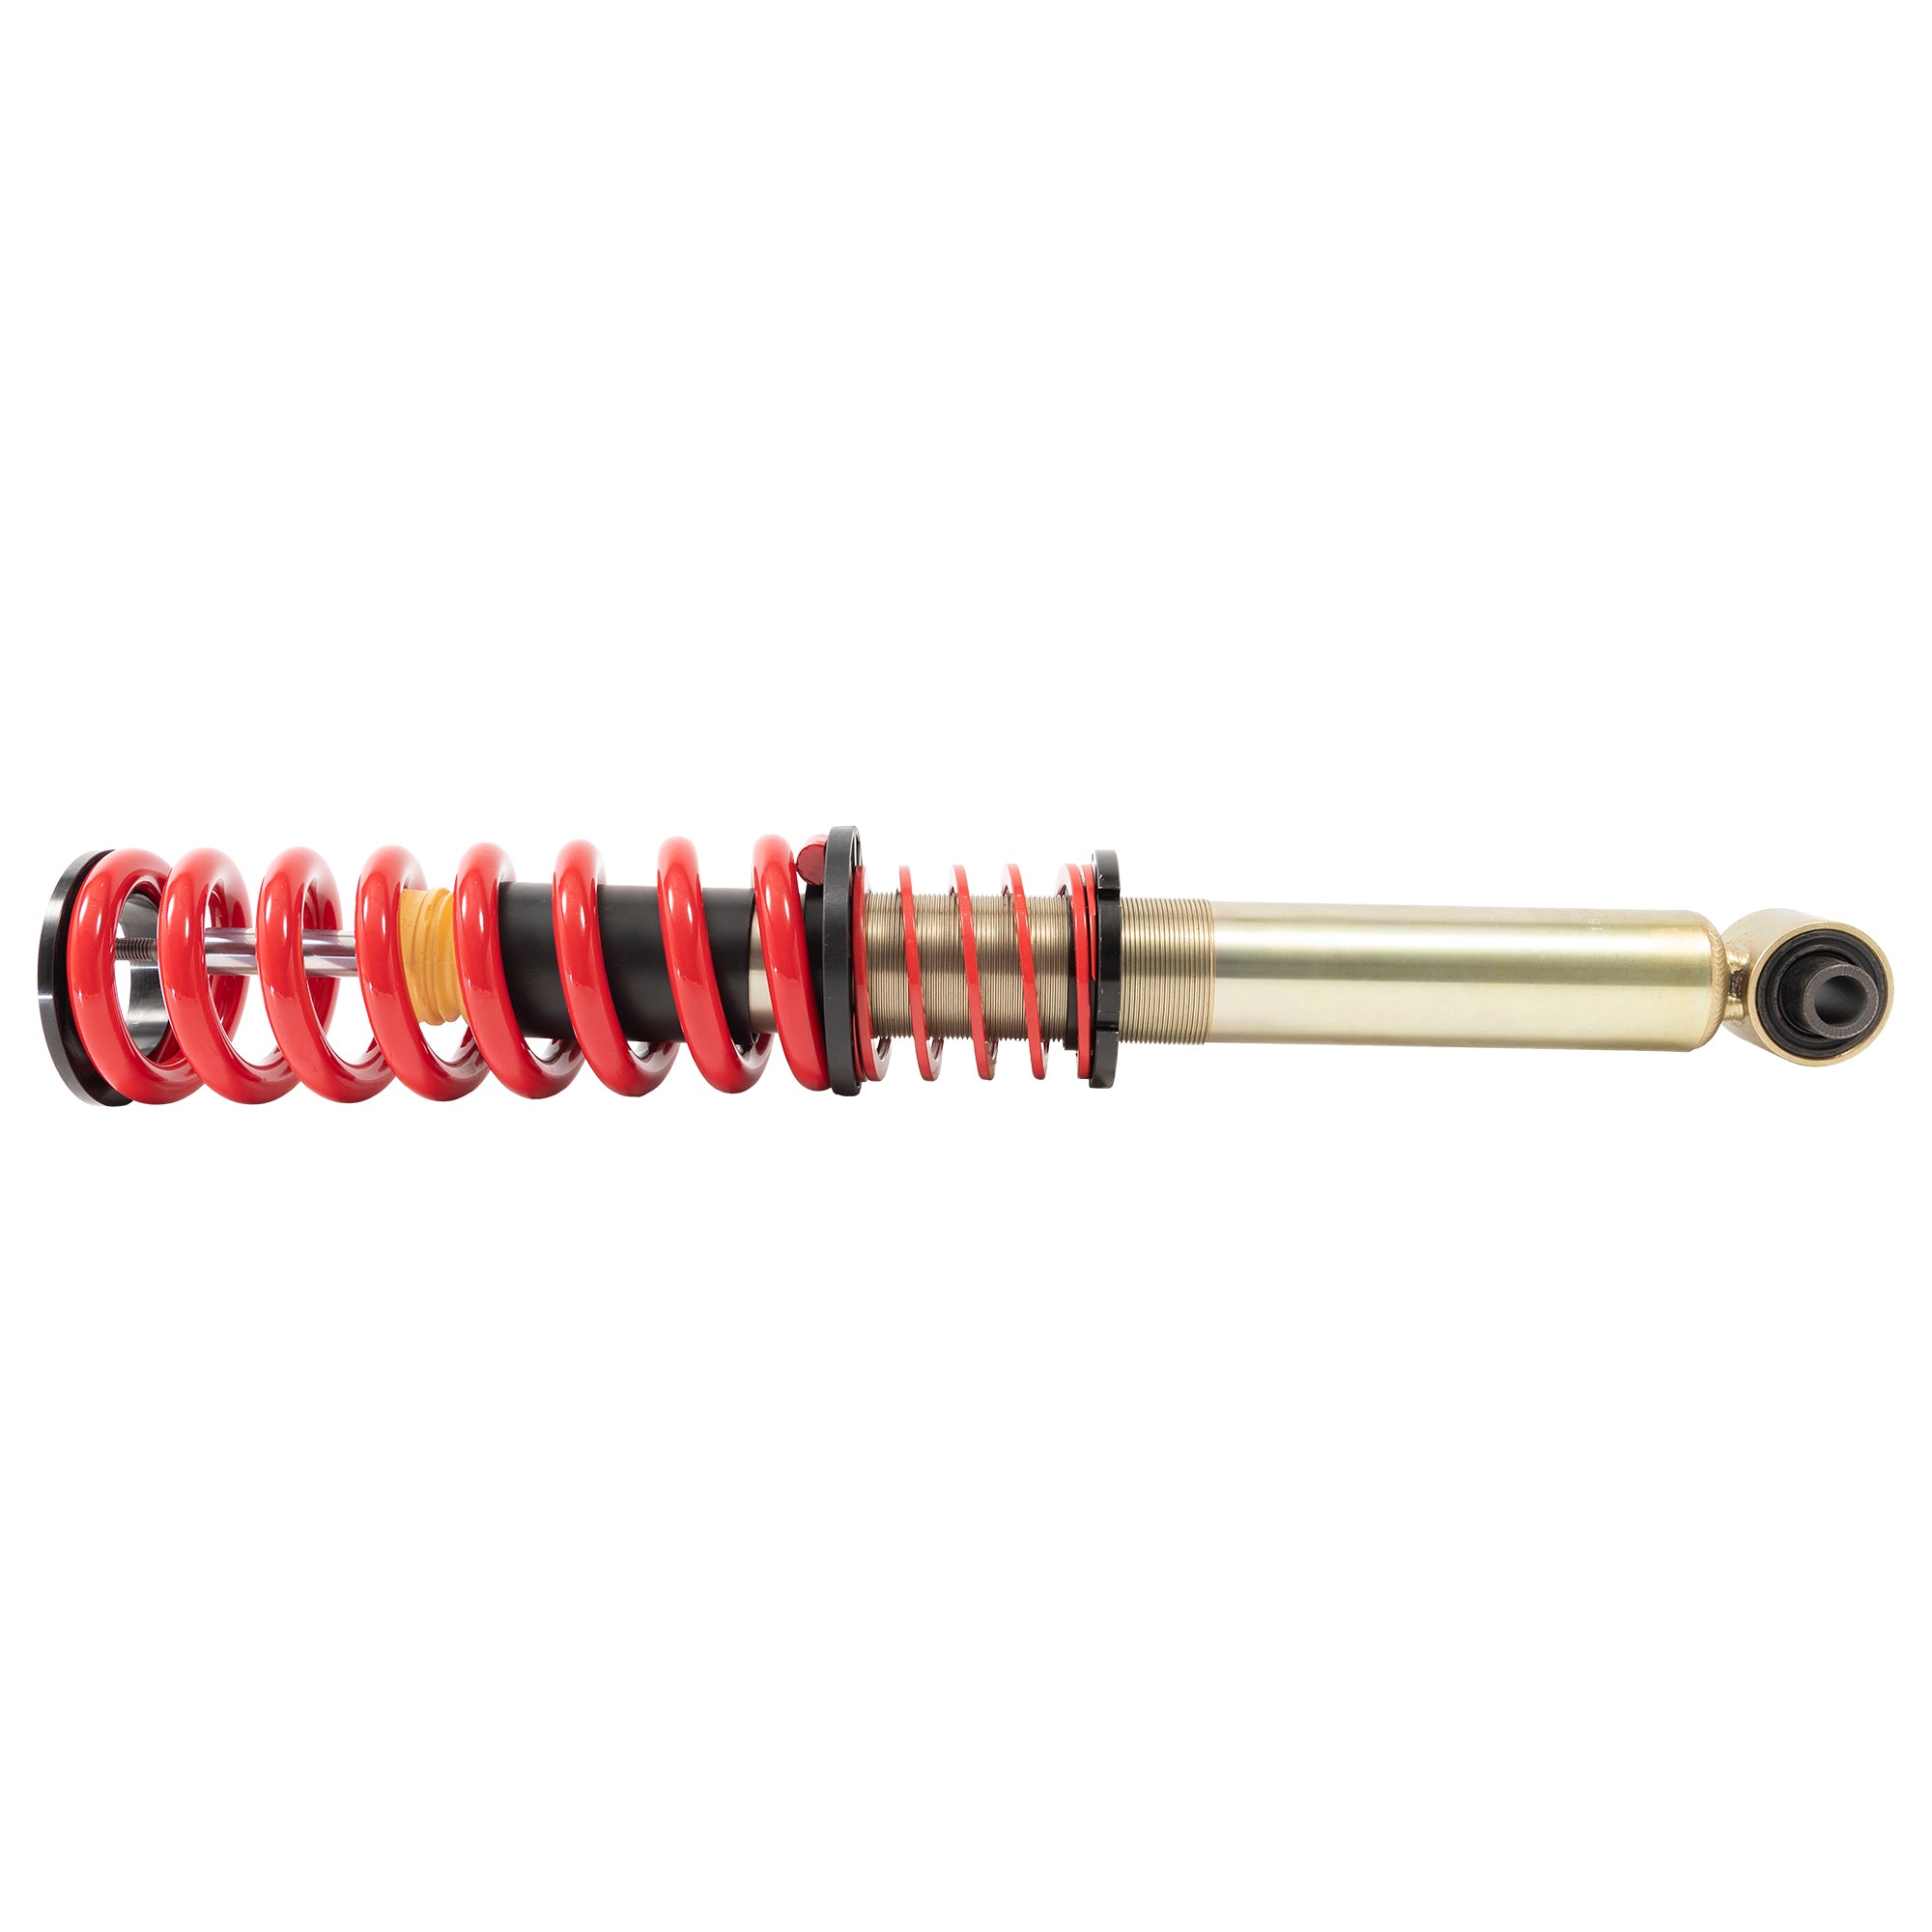 3-6.5" Height Adjustable Rear Lifting Coilover Kit